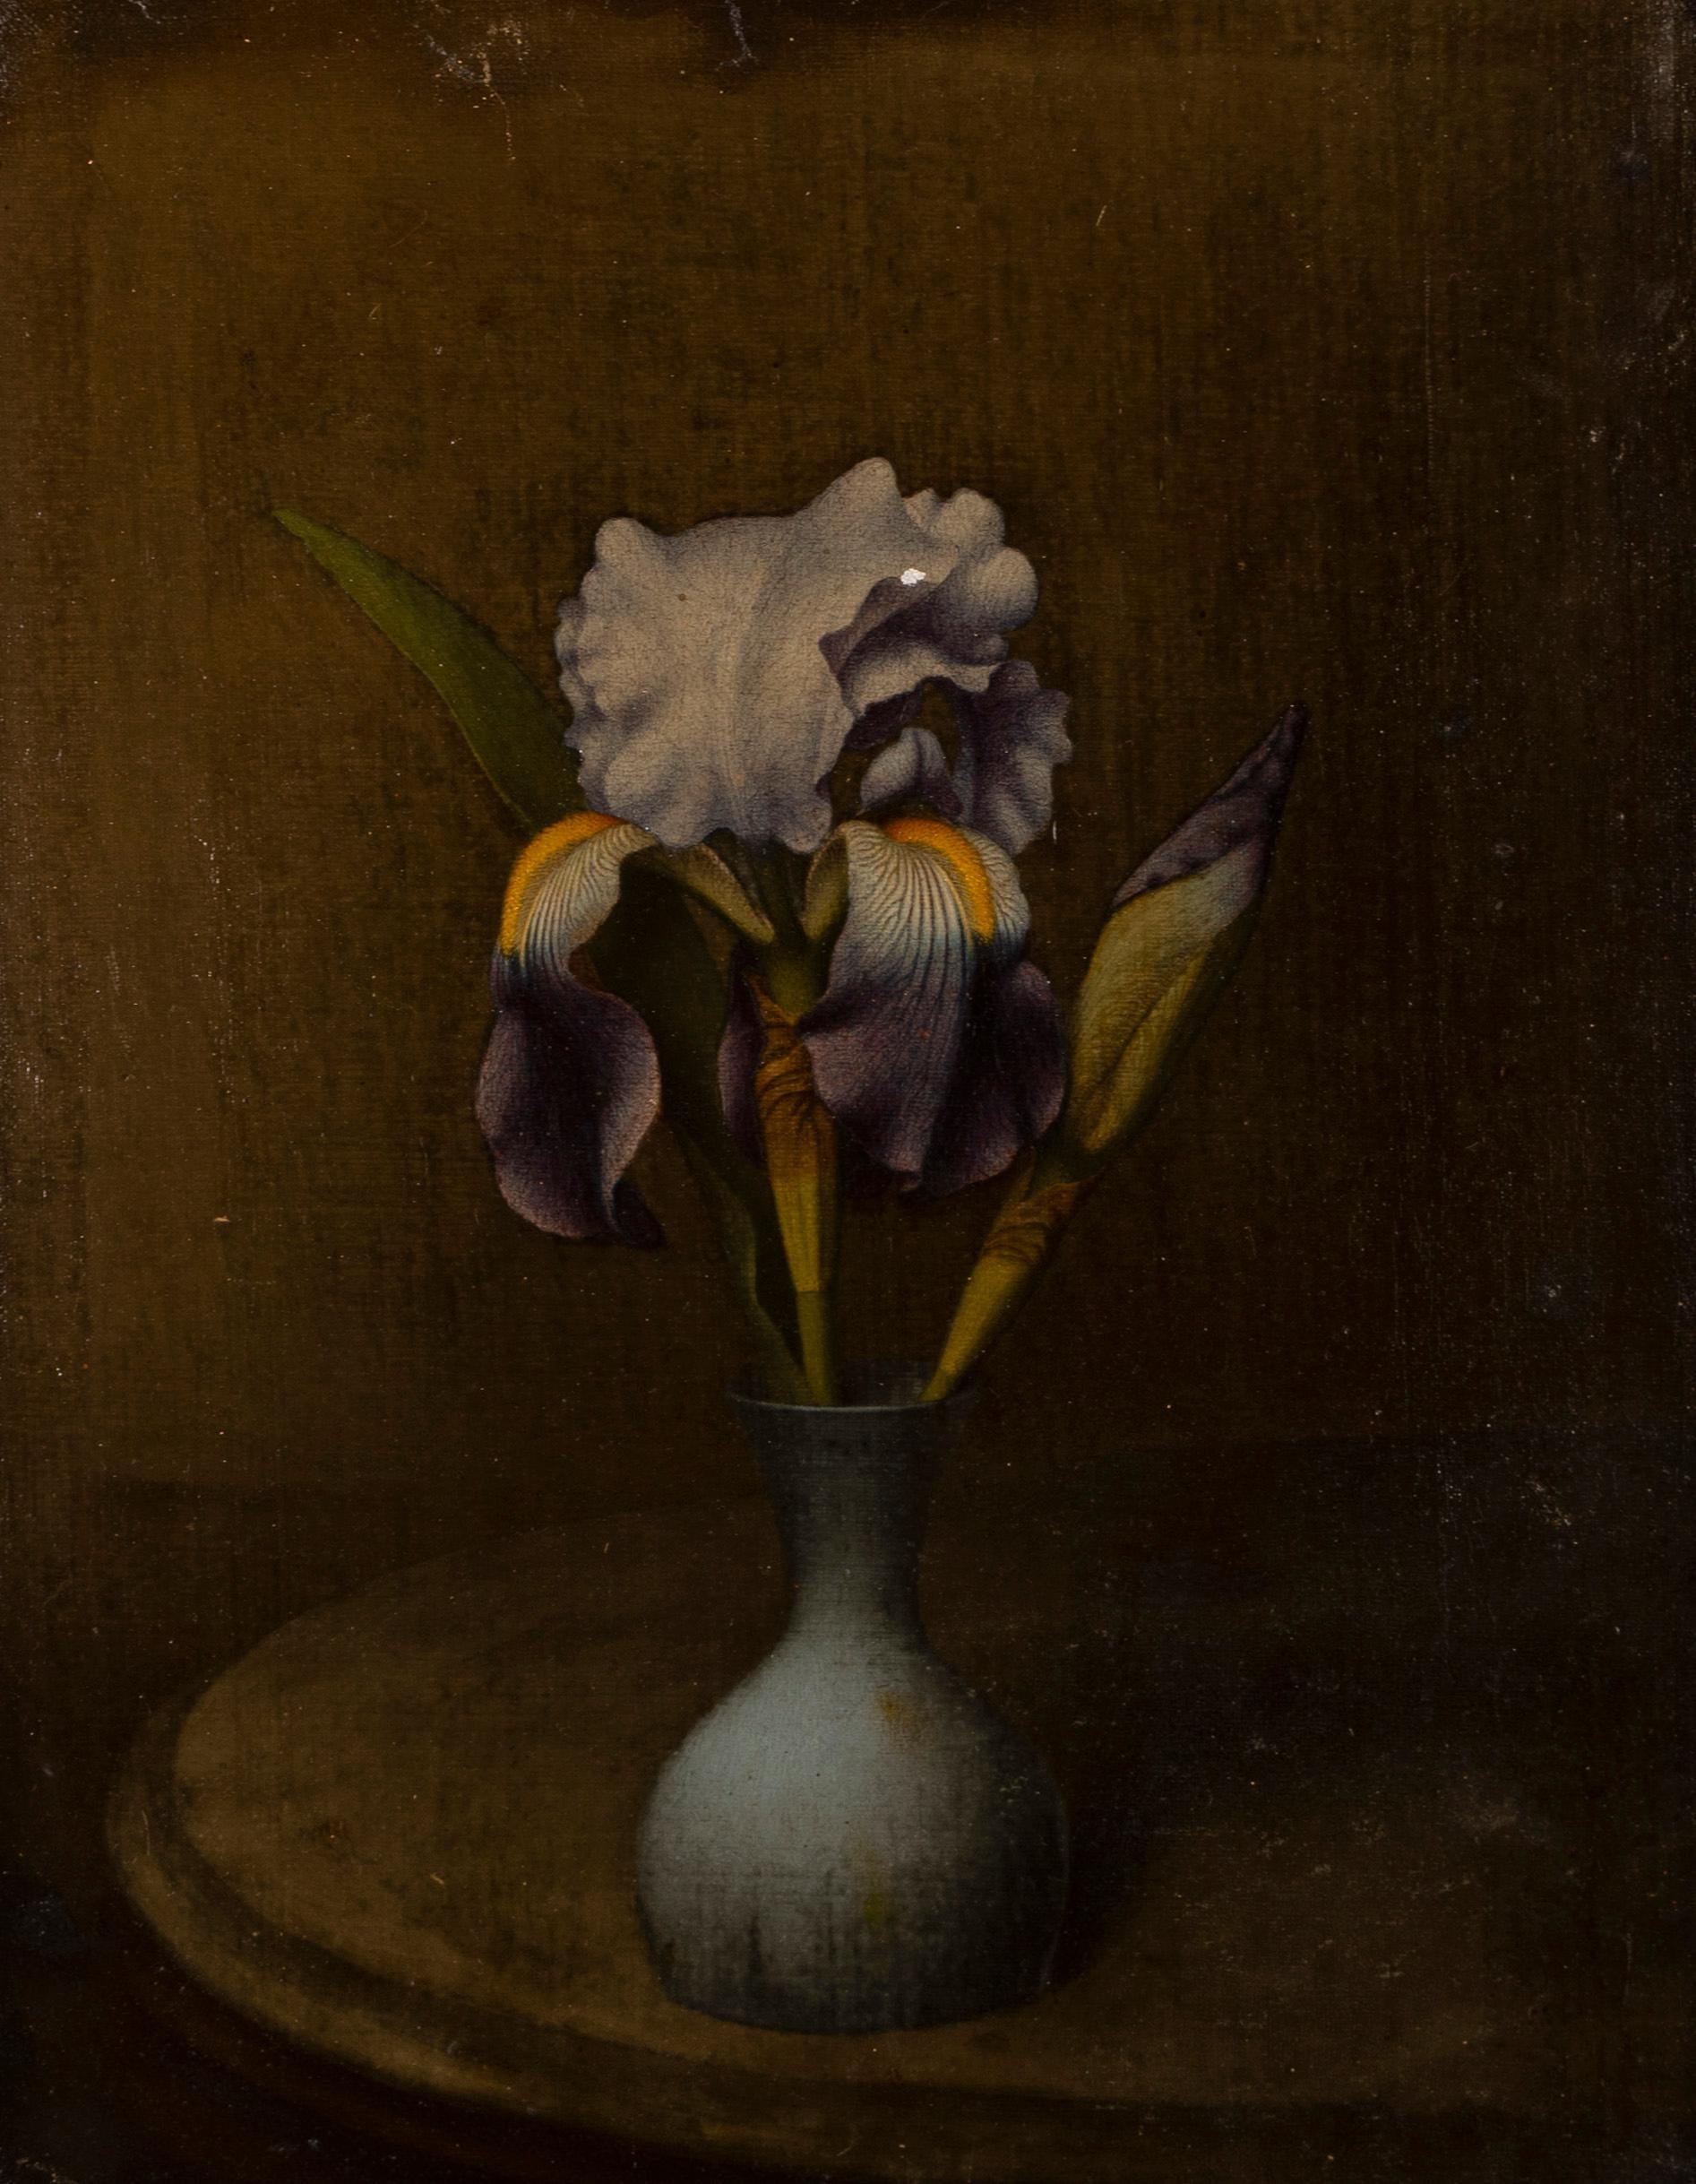 classical still life painting